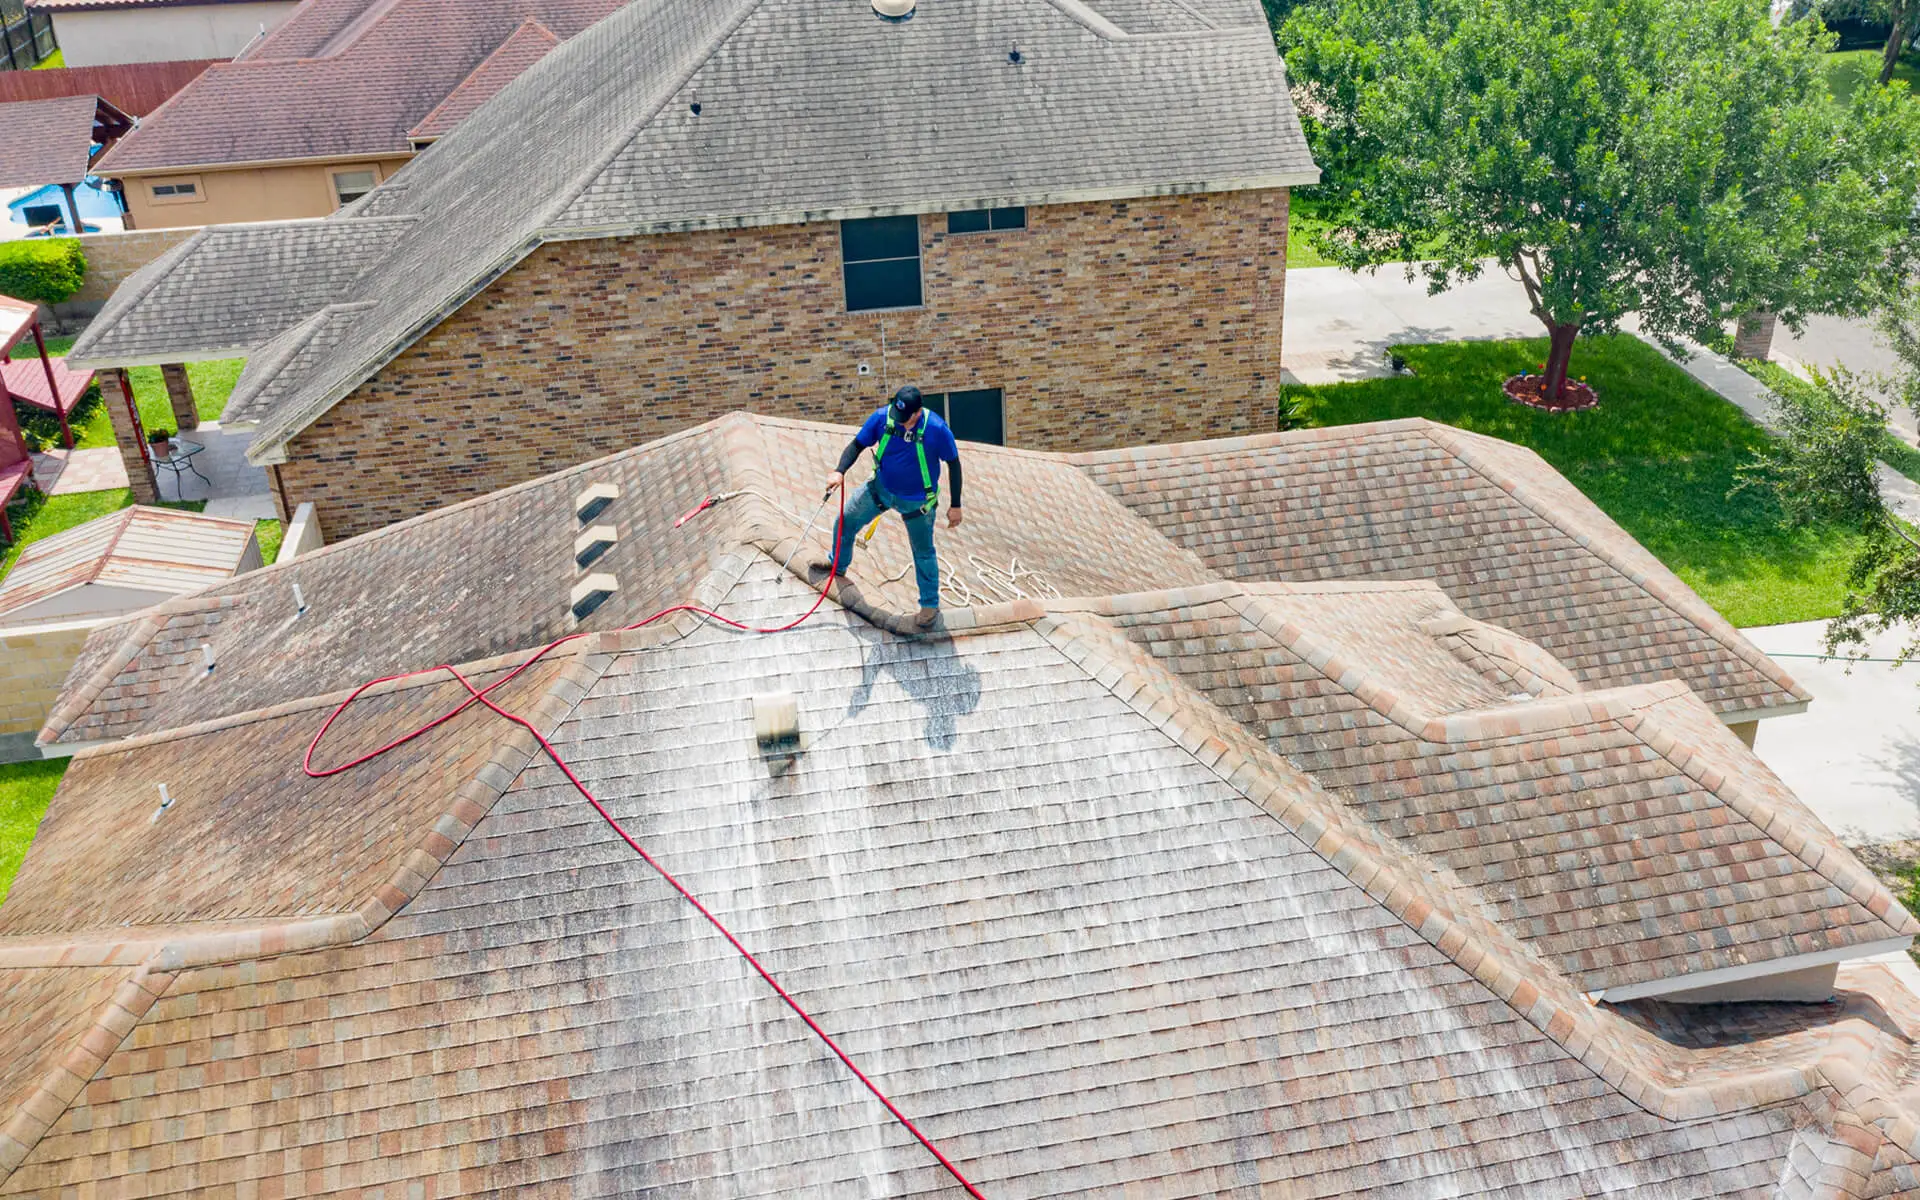 Roof Cleaning Vs Replacement (Which Is A Better Option)